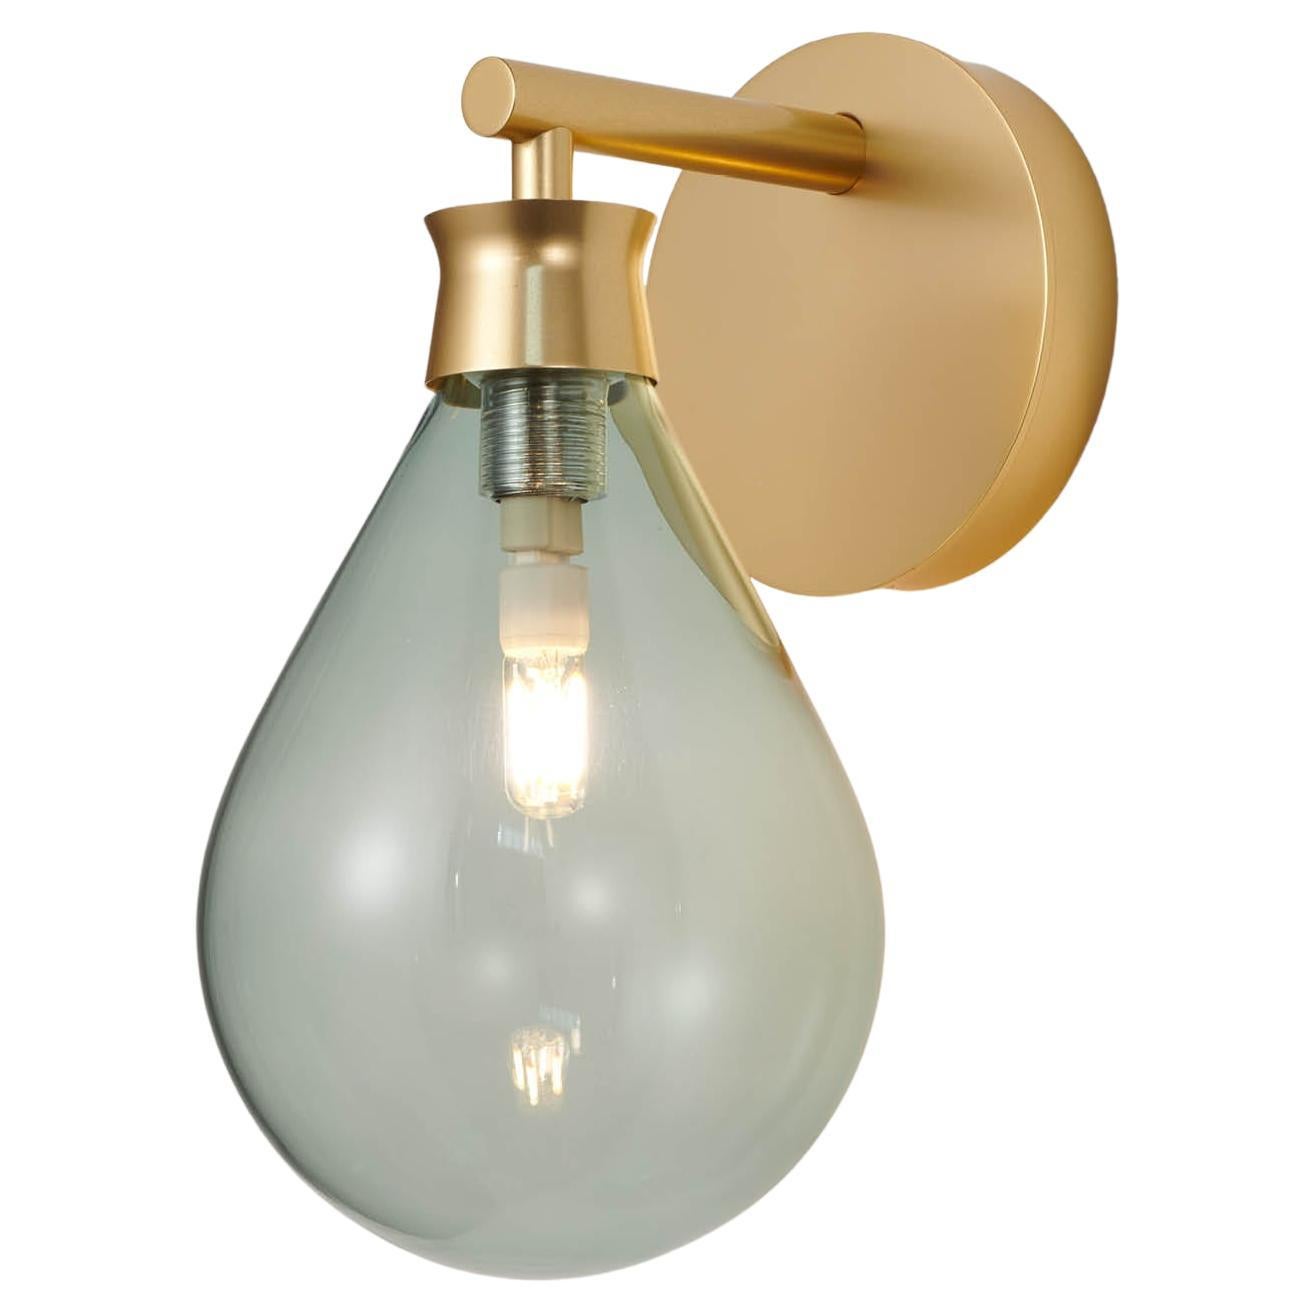 Cintola Wall Light in Satin Gold with Smoke Grey Handblown Glass Globe For Sale